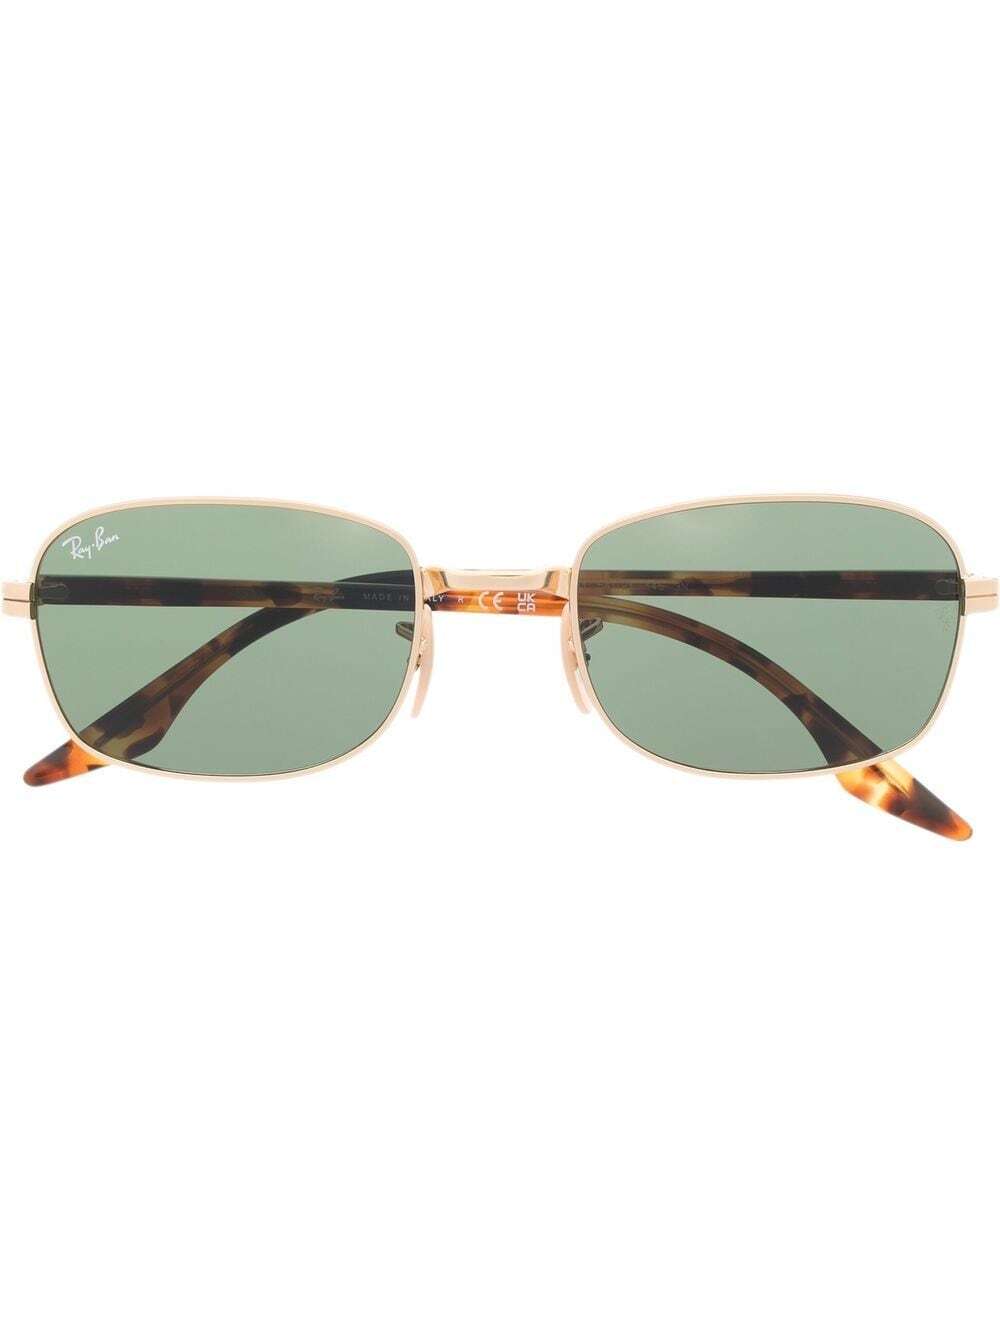 Ray-Ban tortoise square-frame sunglasses - Brown